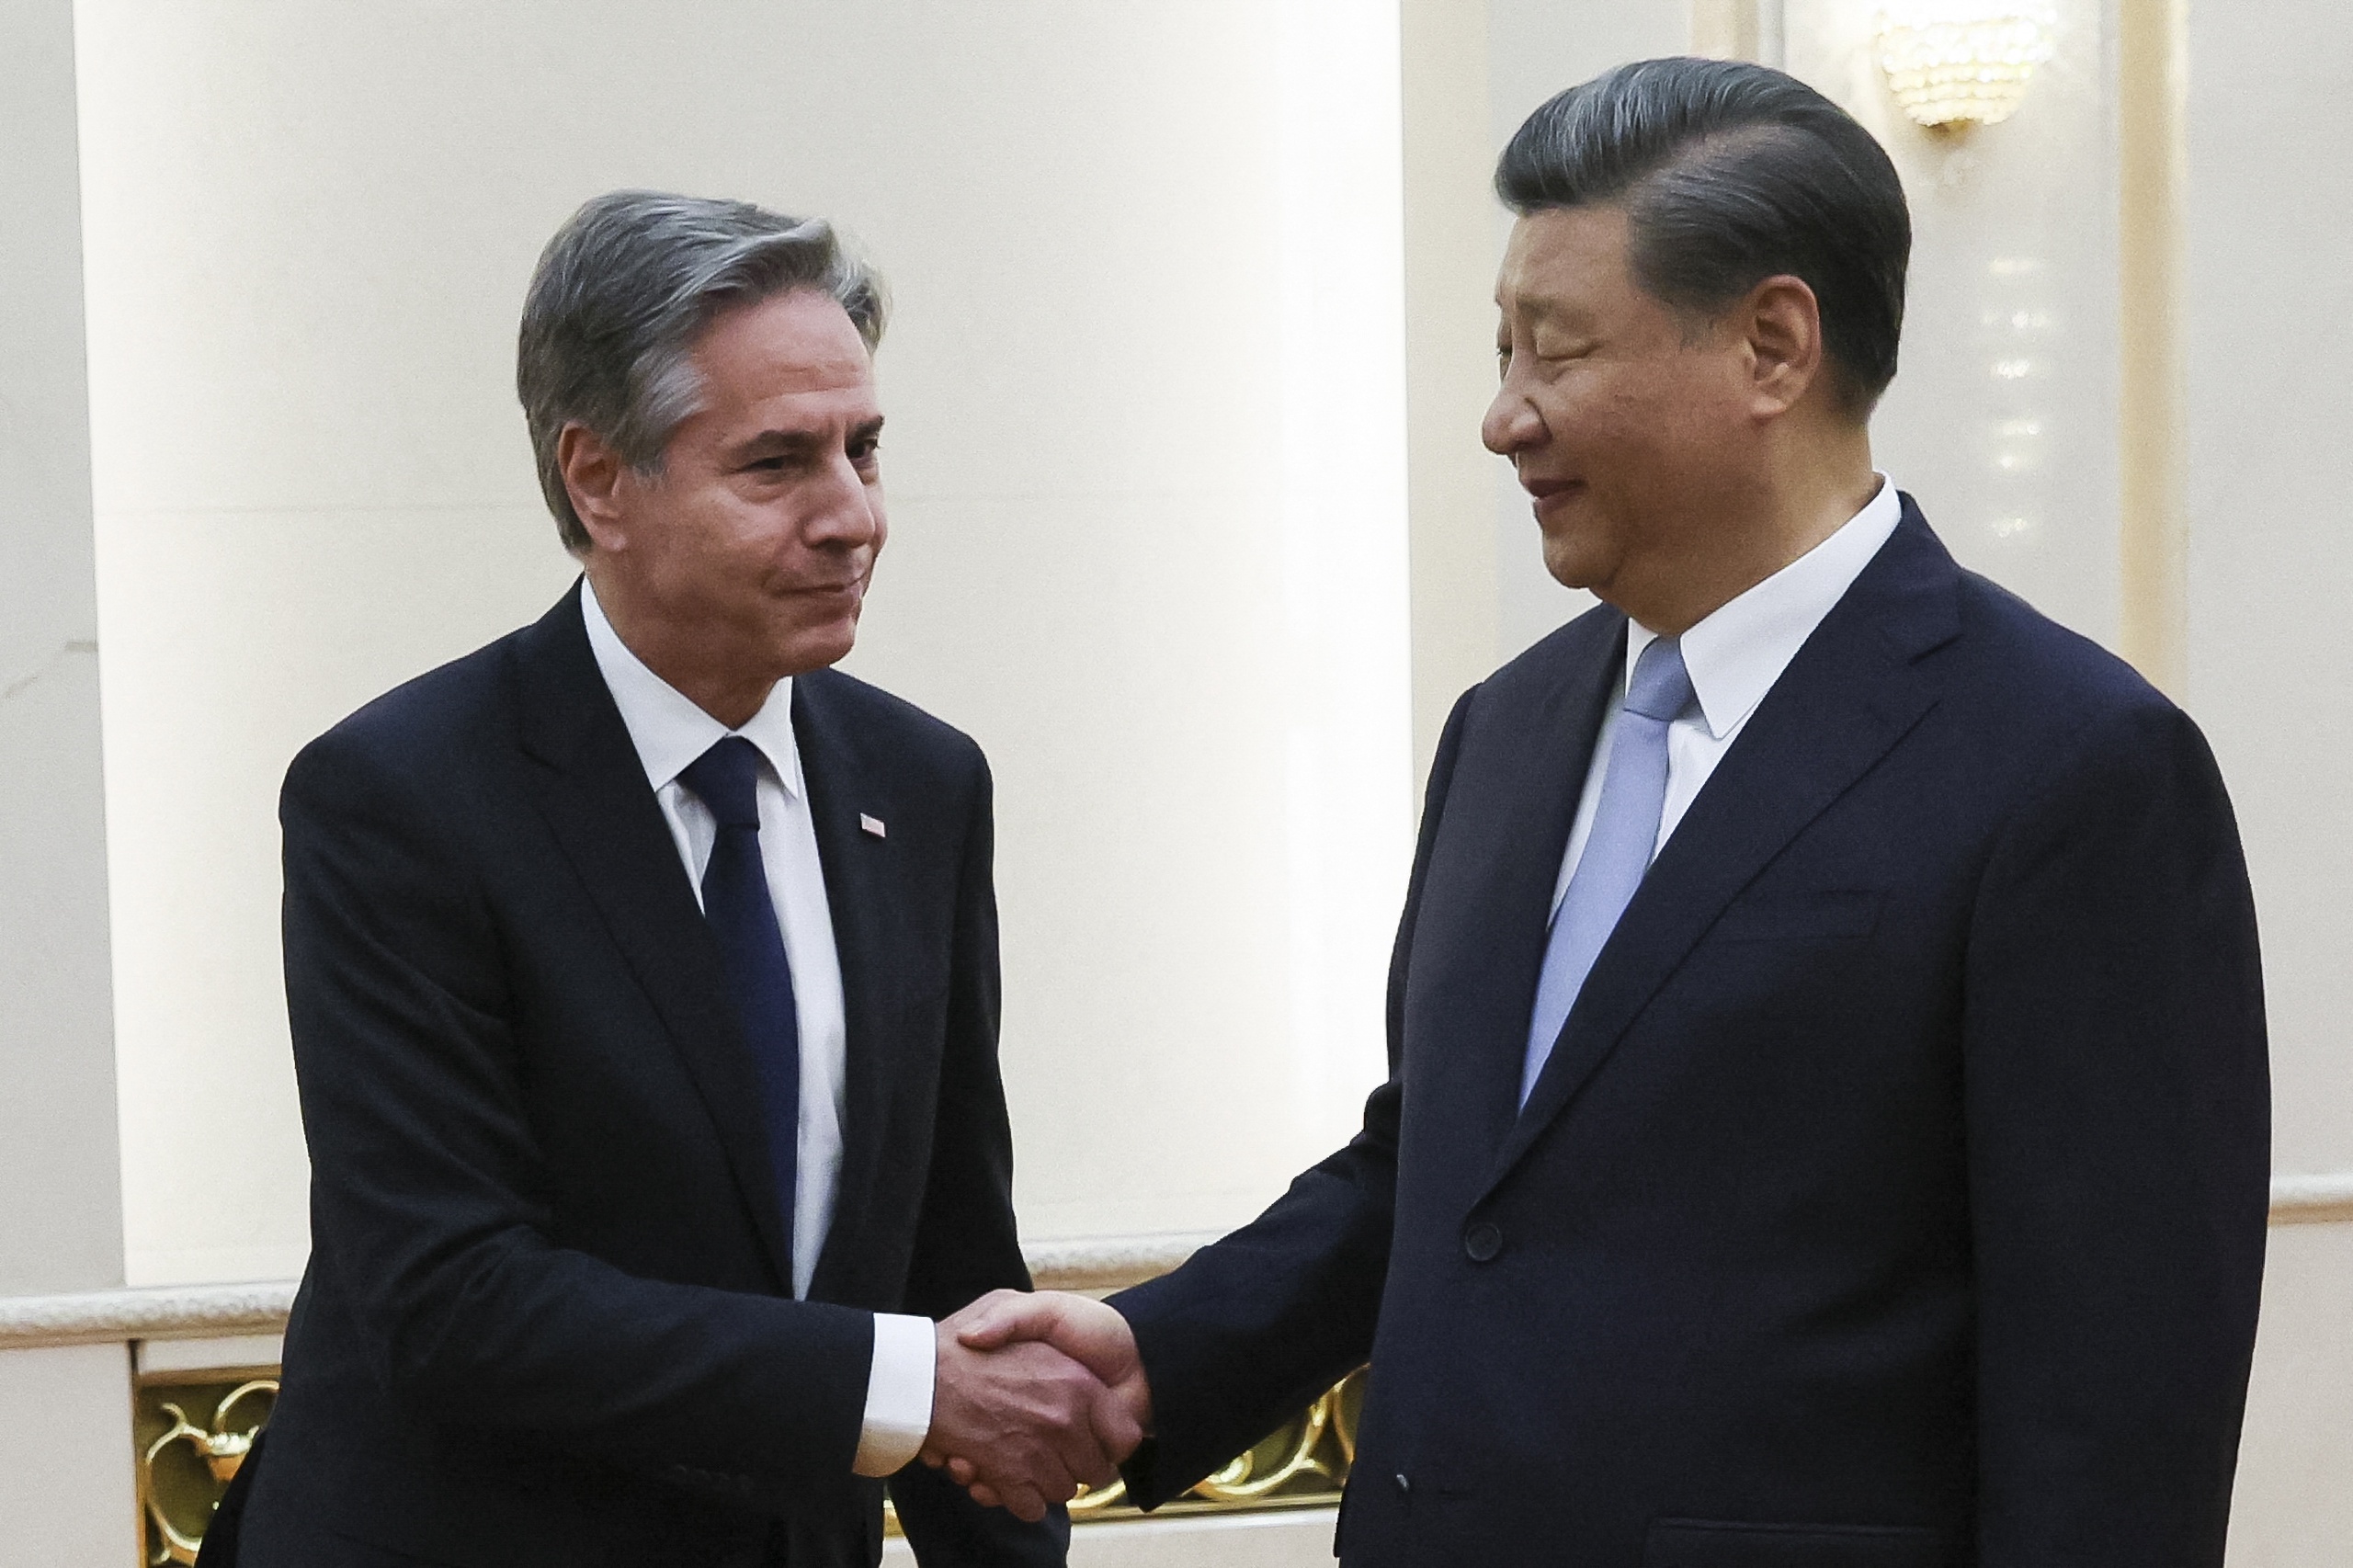 US Secretary of State Antony Blinken meets Chinese President Xi Jinping during his state visit to China.  The Chinese president has introduced a new law to be able to crack down on the United States.  On Saturday, the law will come into effect allowing China to take measures to combat the 